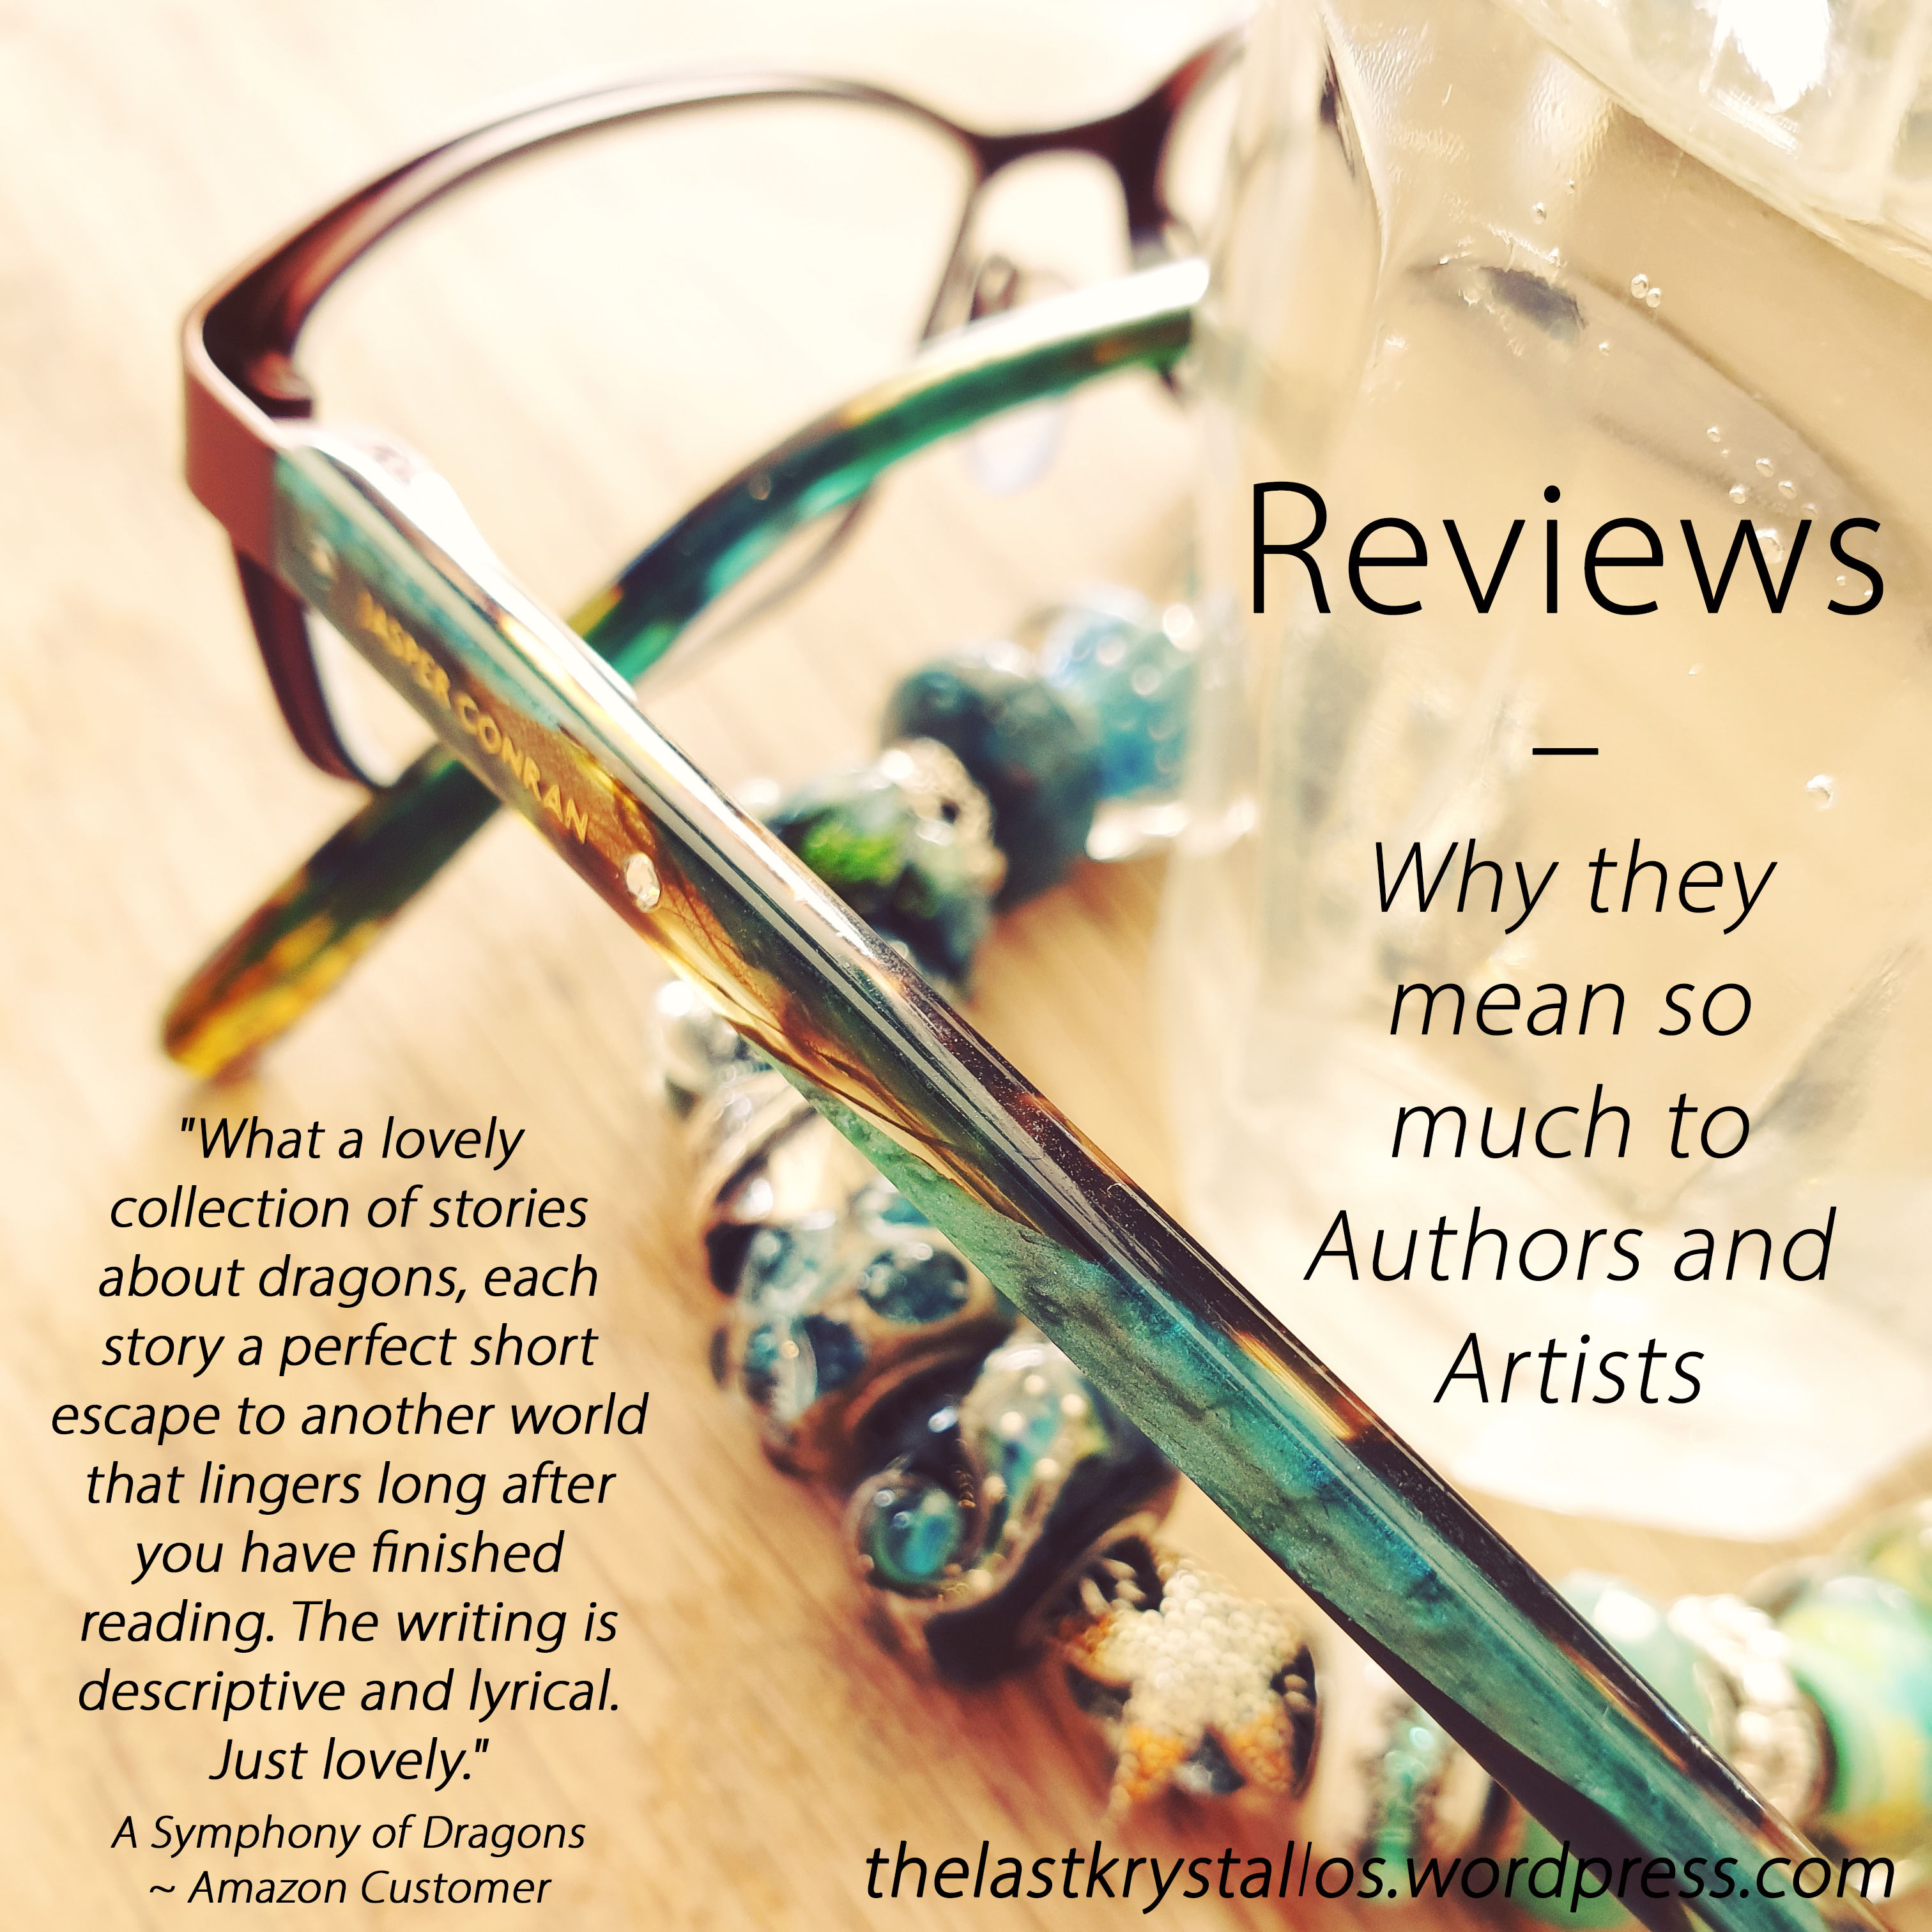 Reviews - Why they mean so much to Authors and Artists - The Last Krystallos